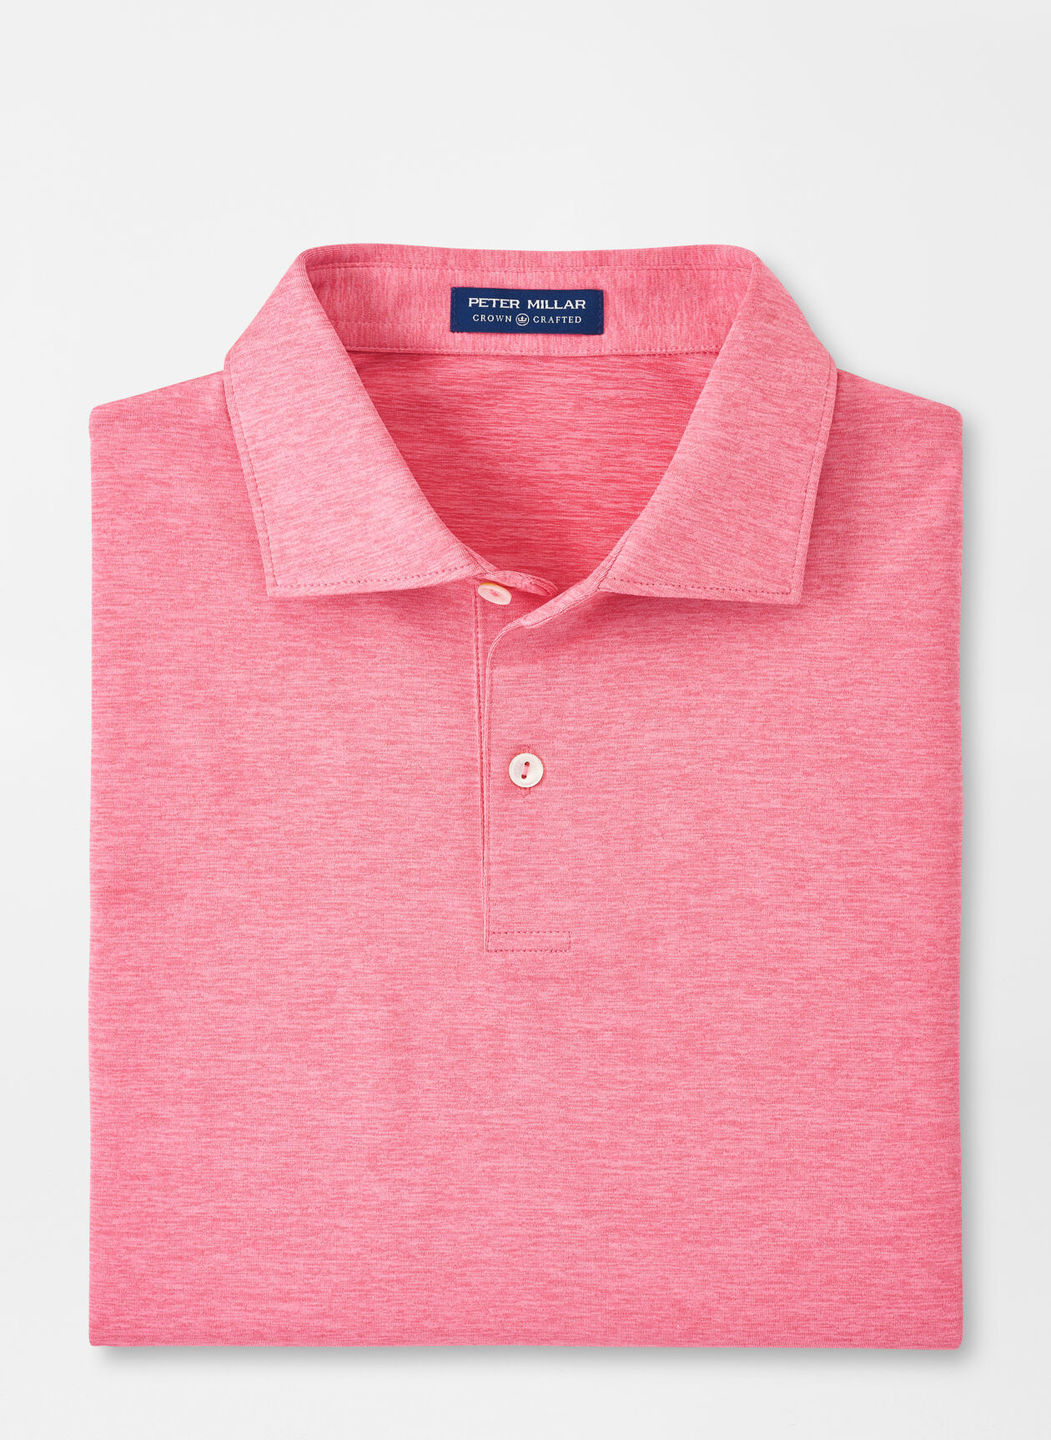 Solid Performance Jersey Polo - Begonia | Peter Millar